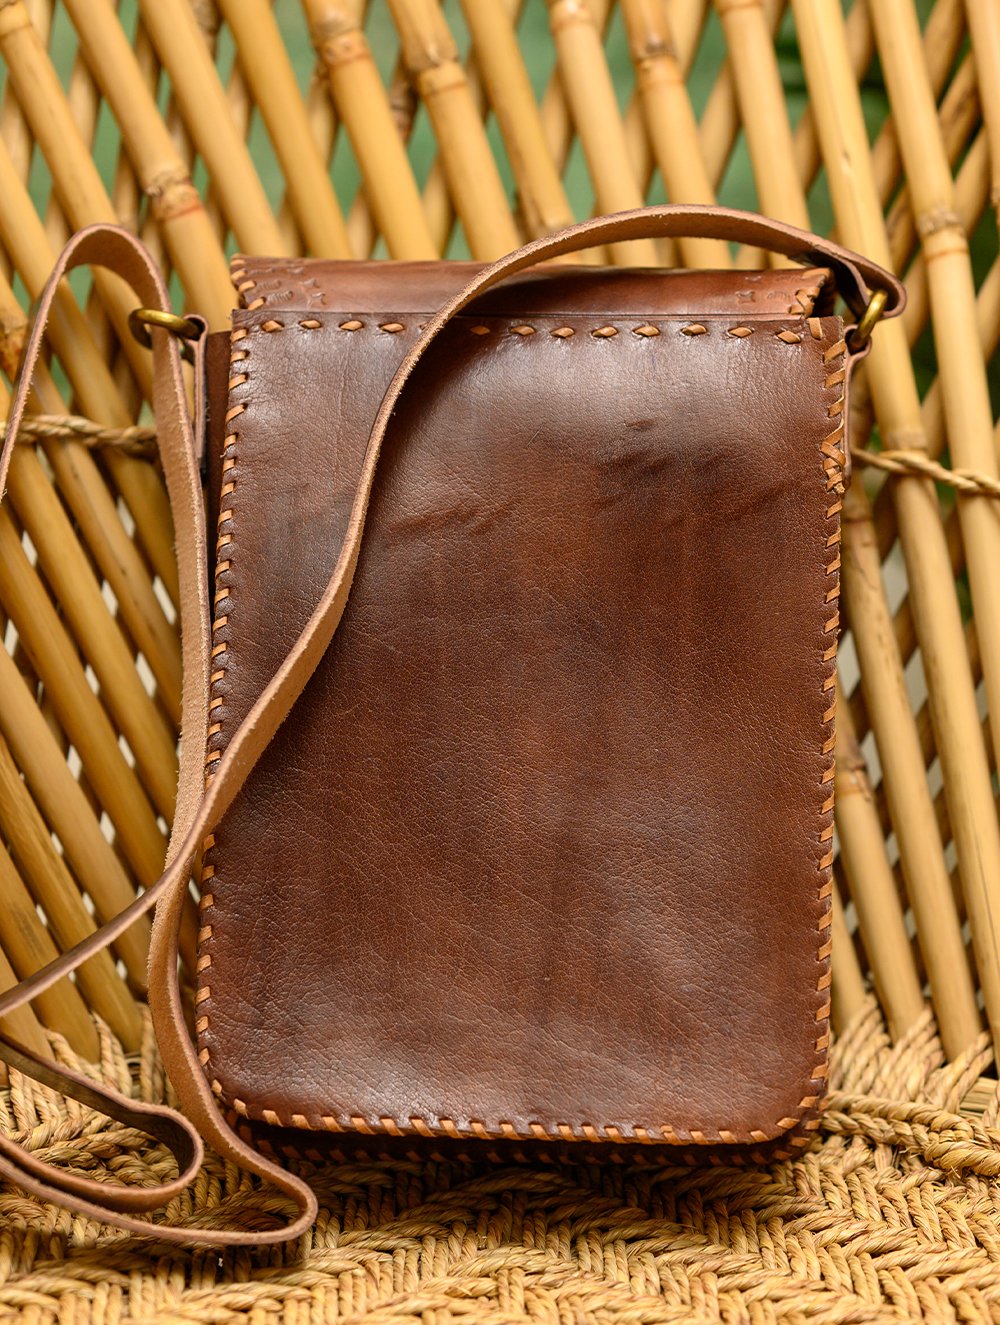 Buy Handcrafted Leather Cross Body Bag With Hand Stitch Detail Online